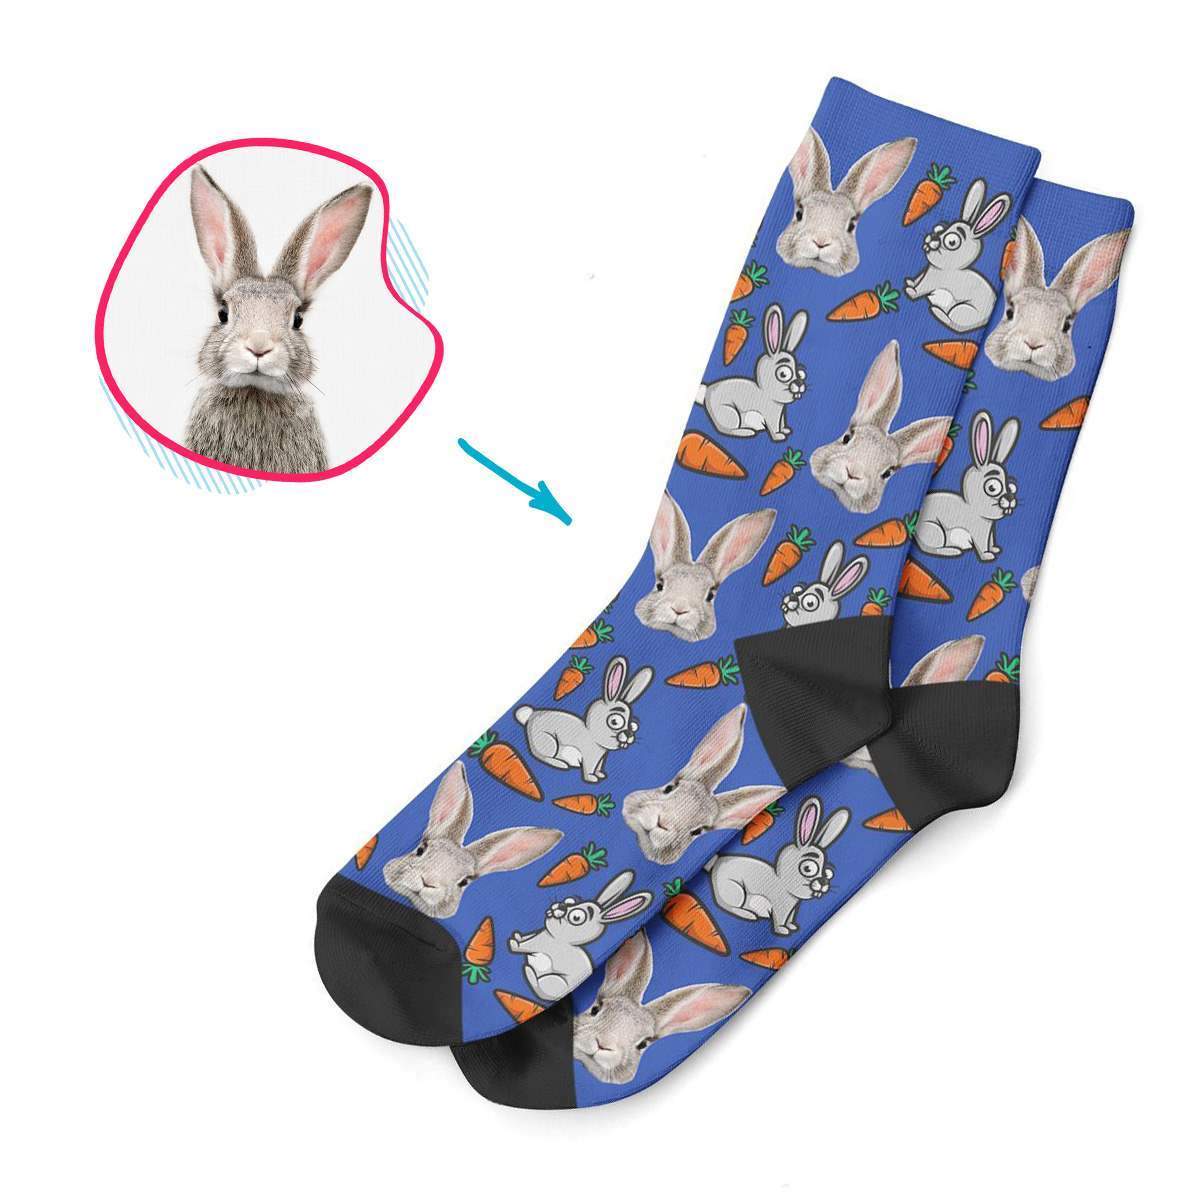 darkblue Bunny socks personalized with photo of face printed on them